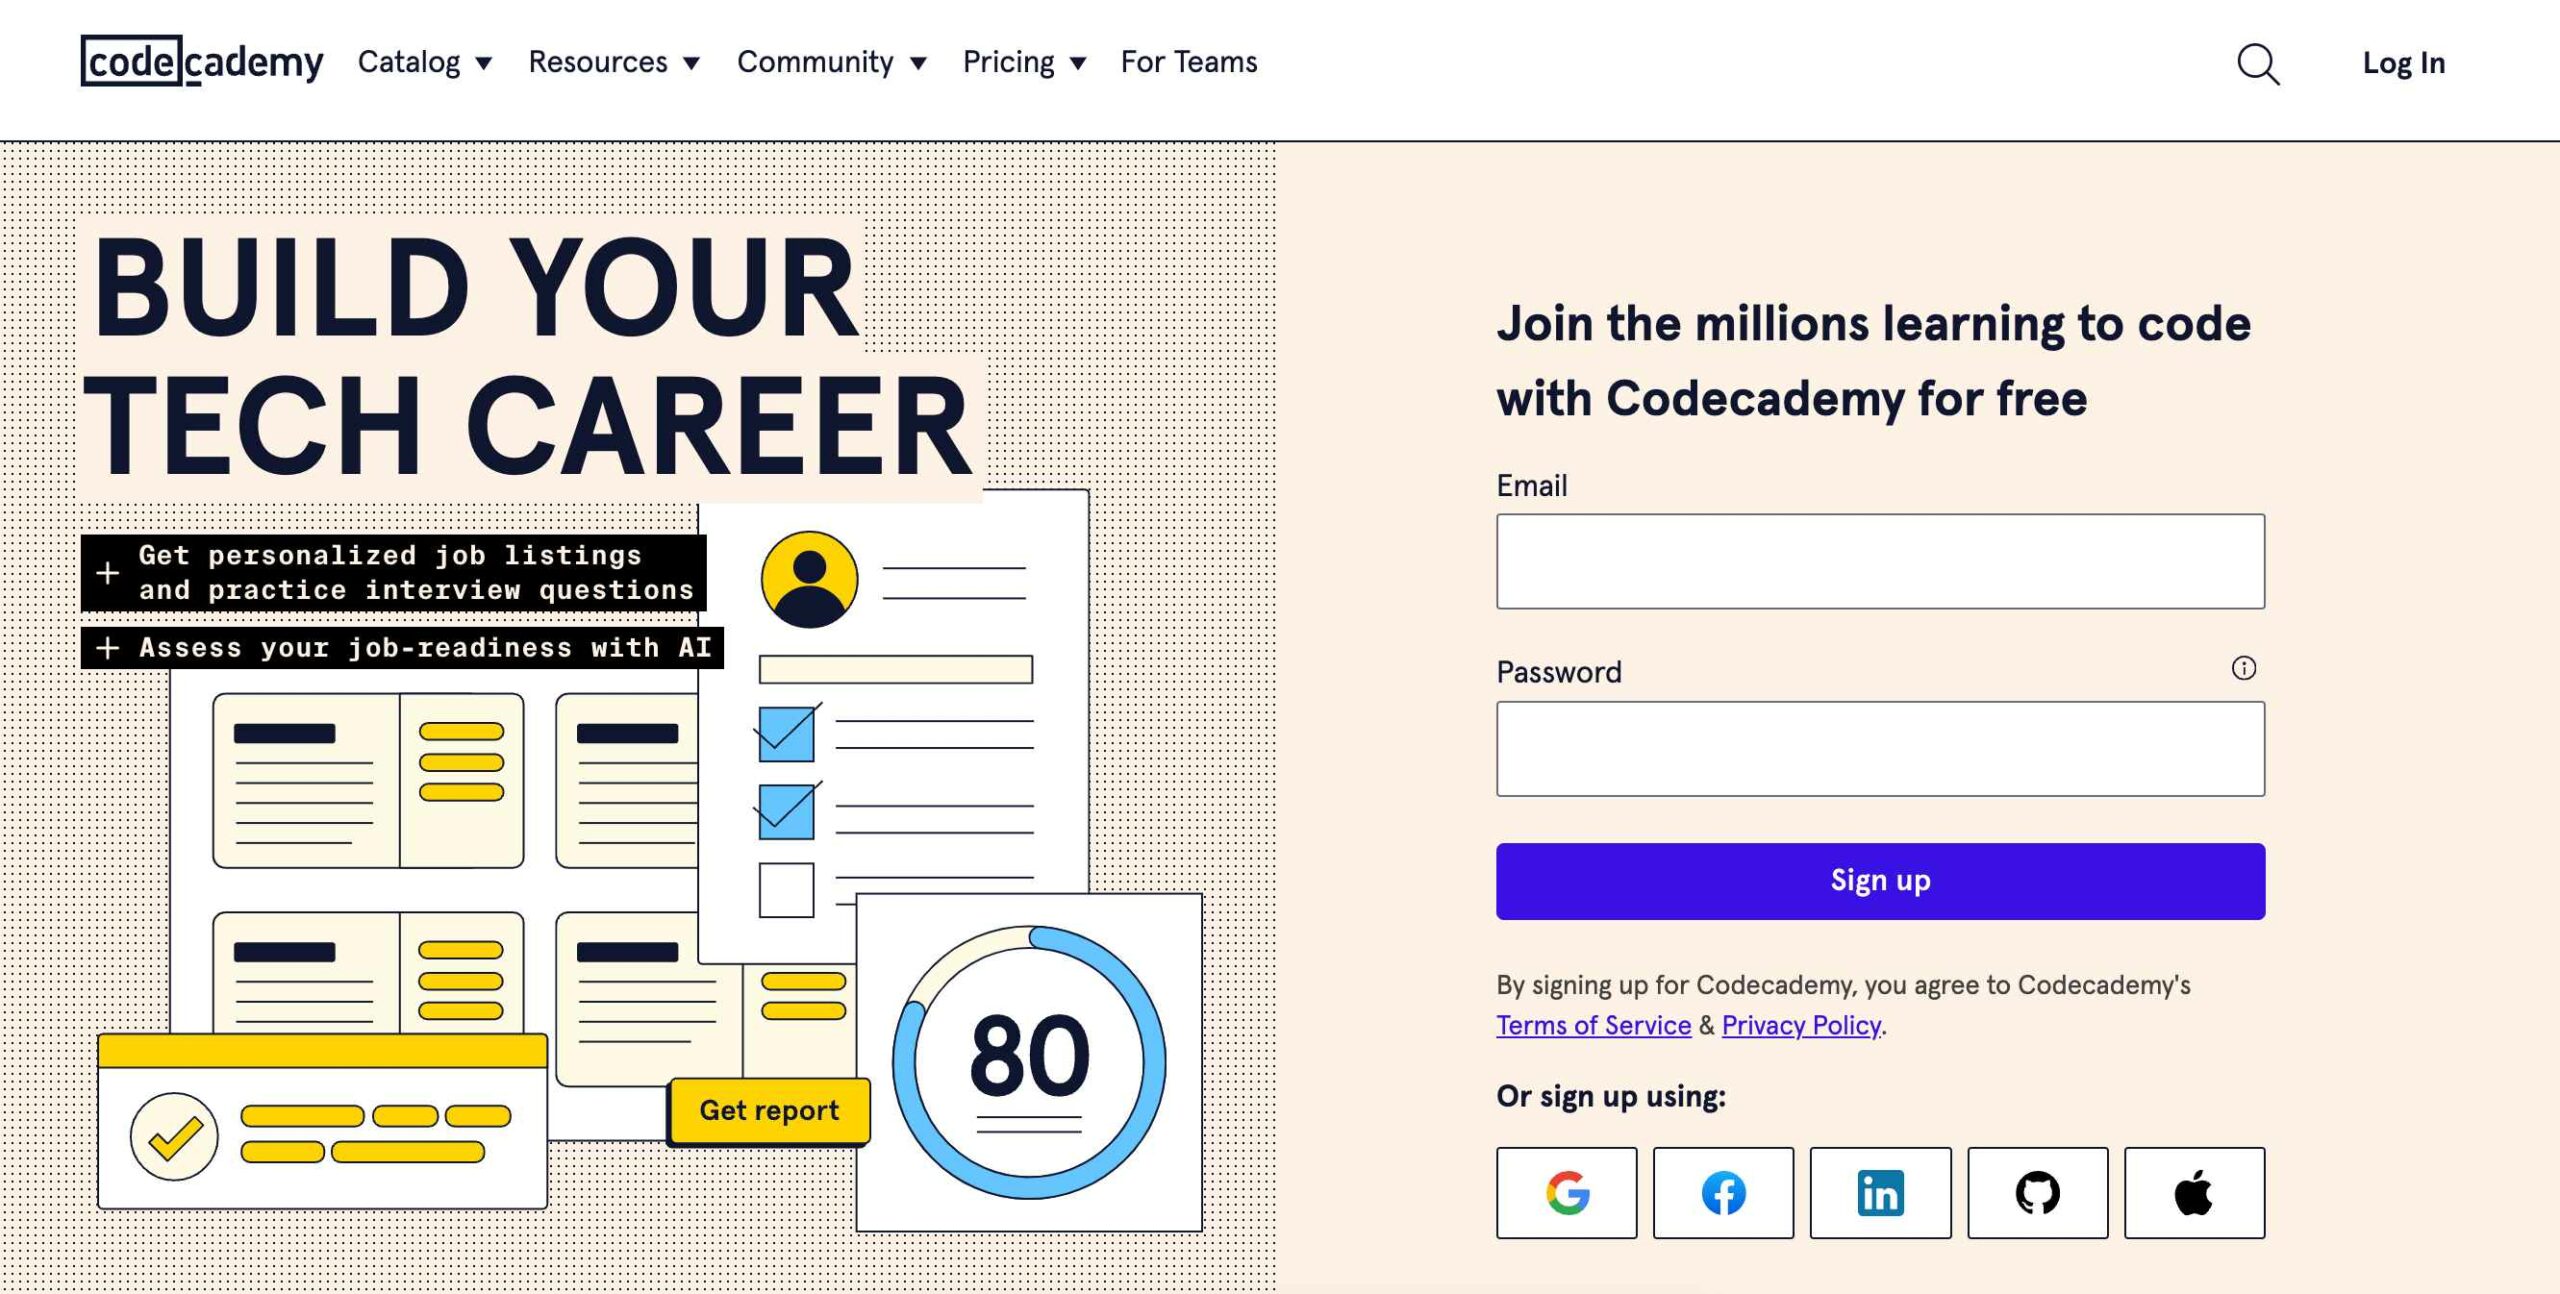 Go To The officila Website Of Codecademy